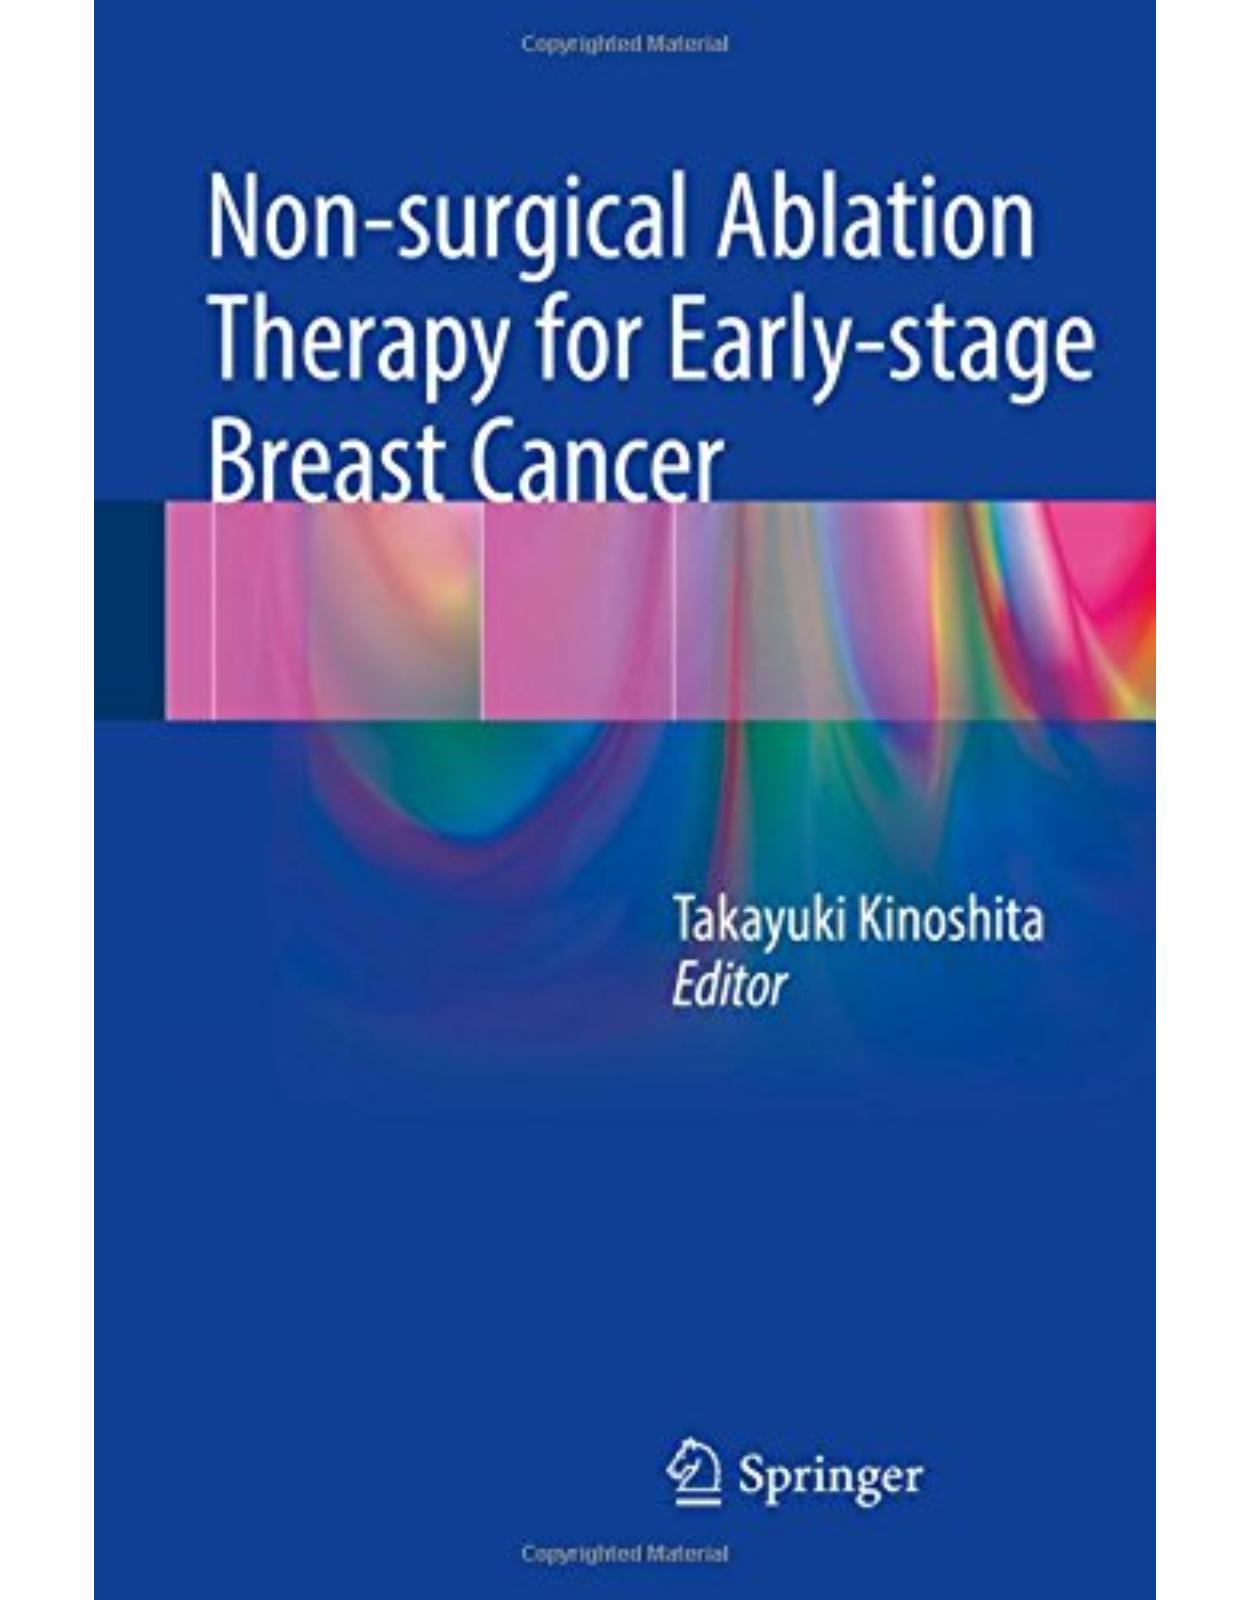 Non-surgical Ablation Therapy for Early-stage Breast Cancer